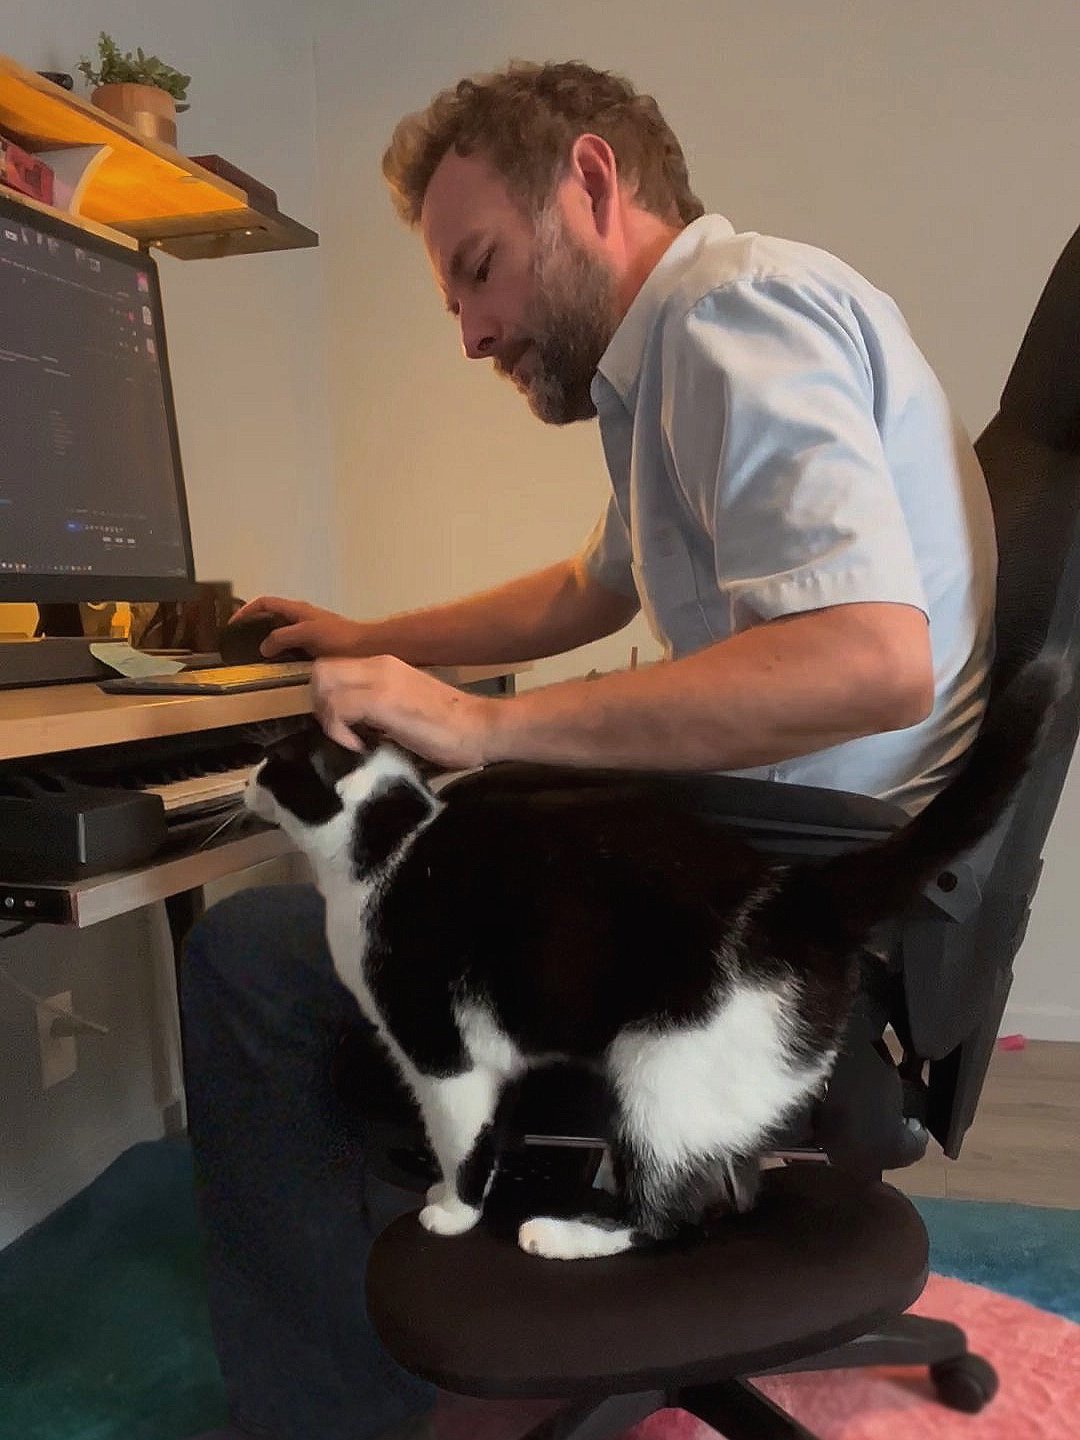 Image of Paul and his cat JoJo in the CritterSitter at his desk.